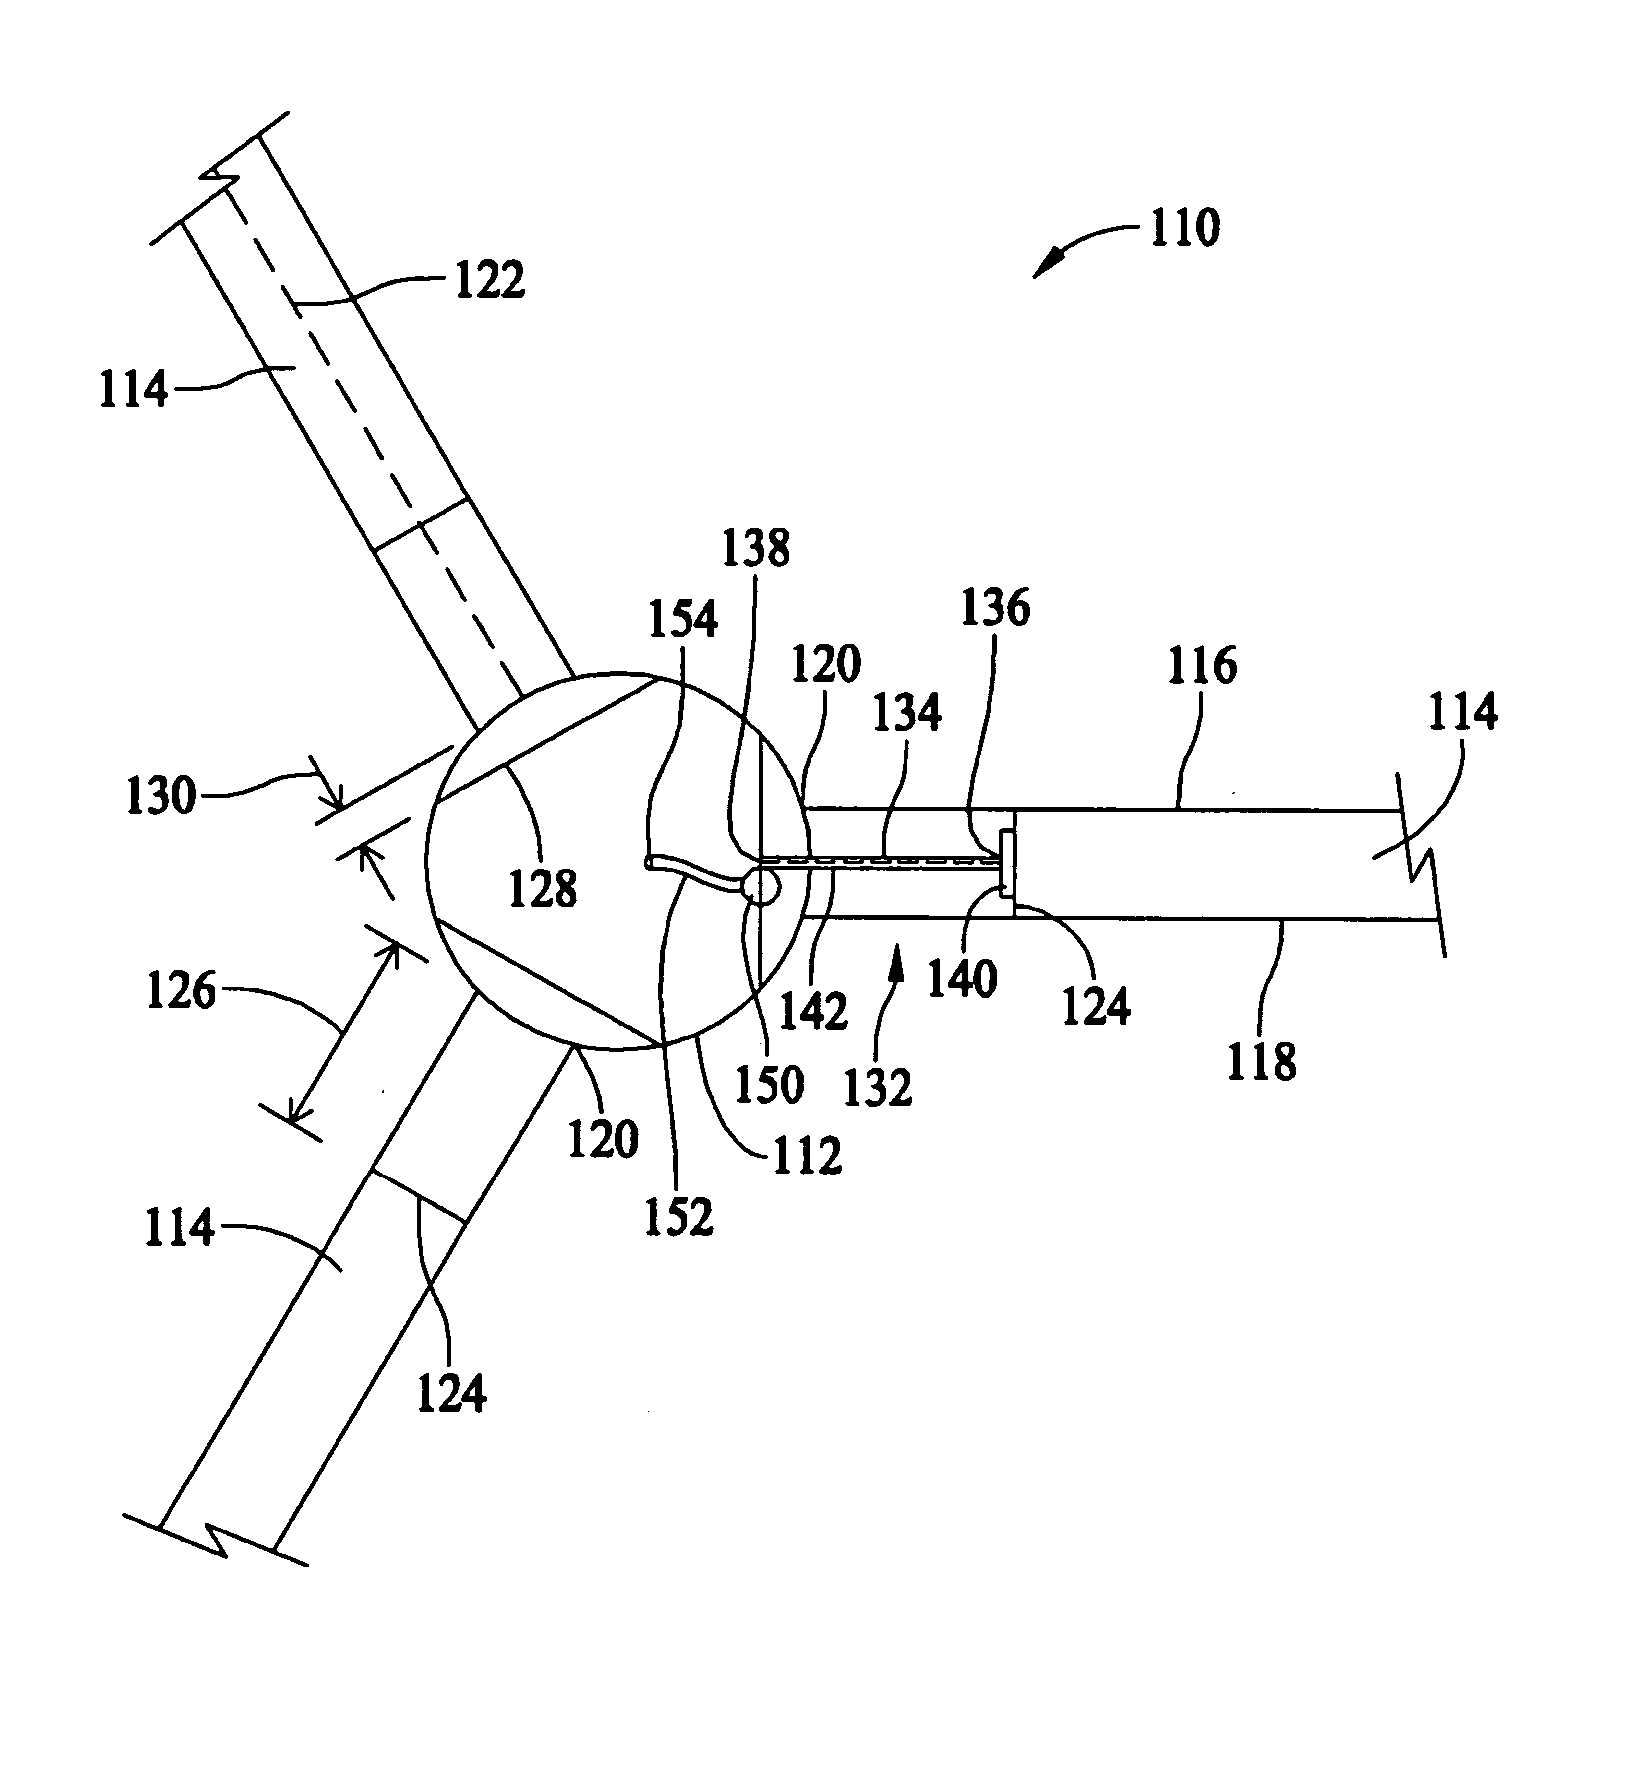 Methods and apparatus for measuring wind turbine blade deflection